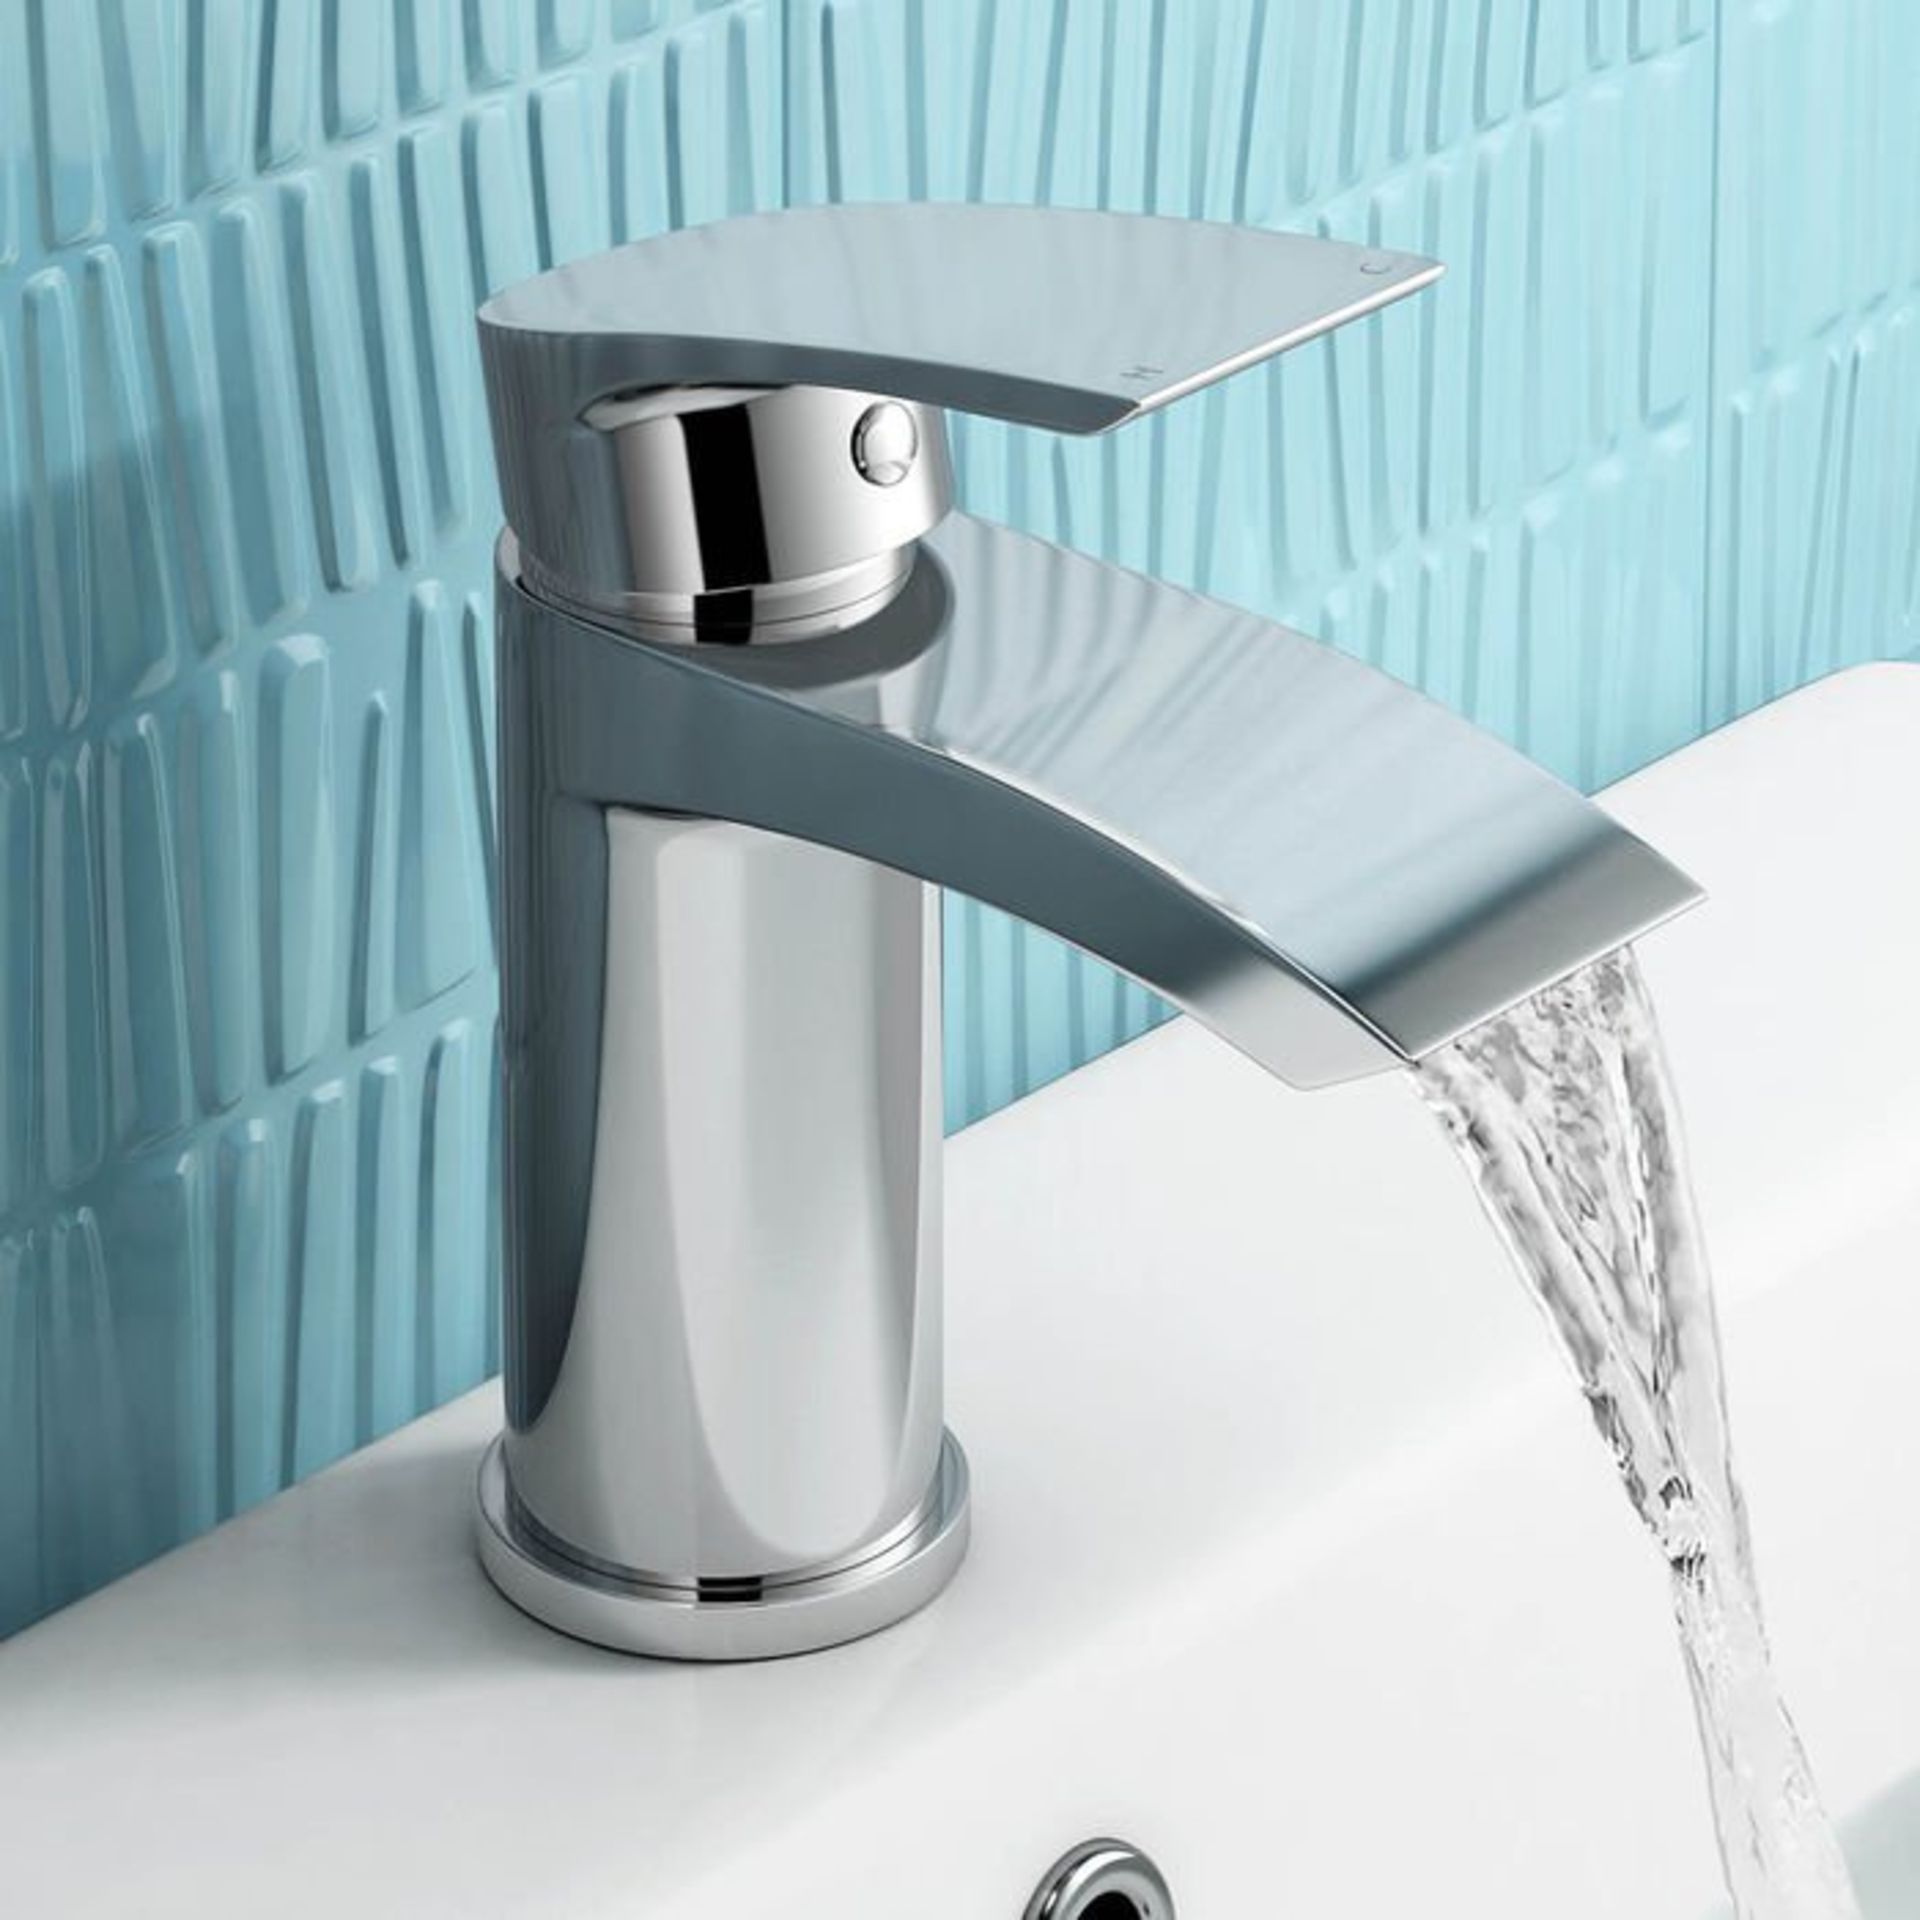 (G31) Avon Mono Basin Mixer Tap Crafted from chrome plated, corrosion free solid brass. Includes